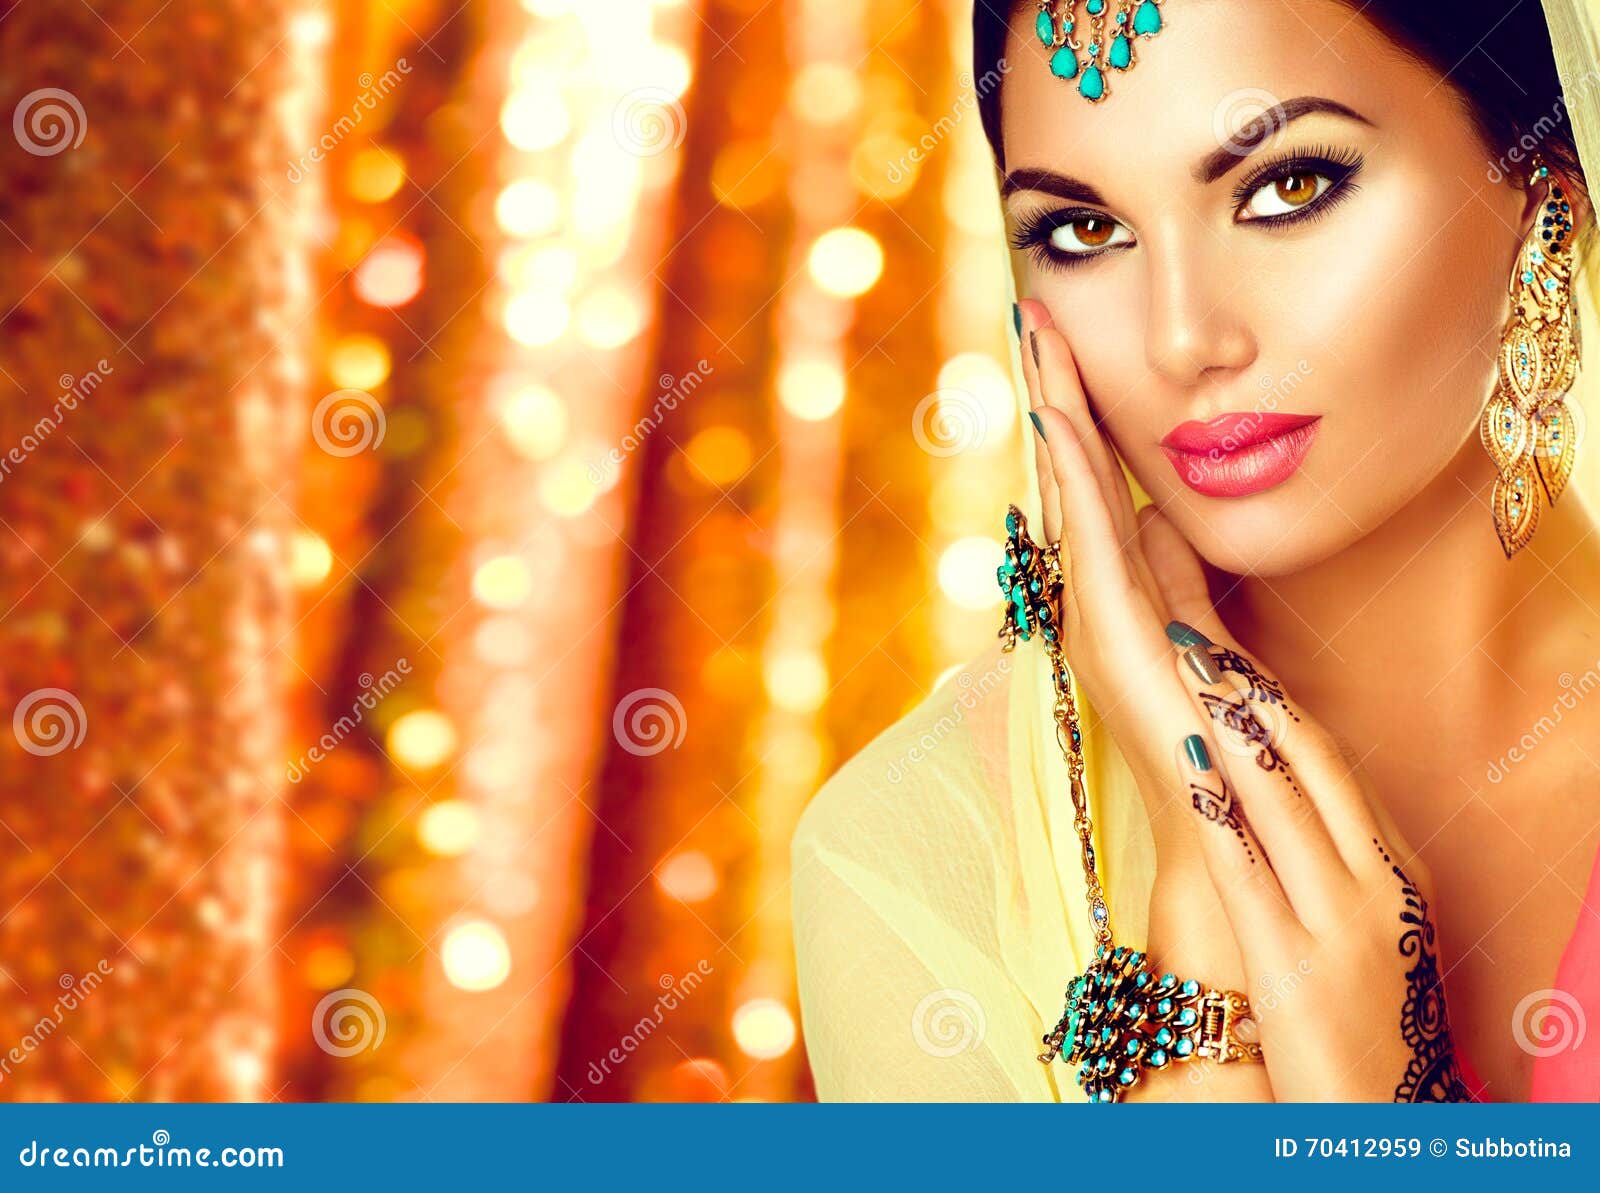 Young Arabian Woman with Mehndi Tattoo and Perfect Make-up Stock Image -  Image of elegant, culture: 70412959